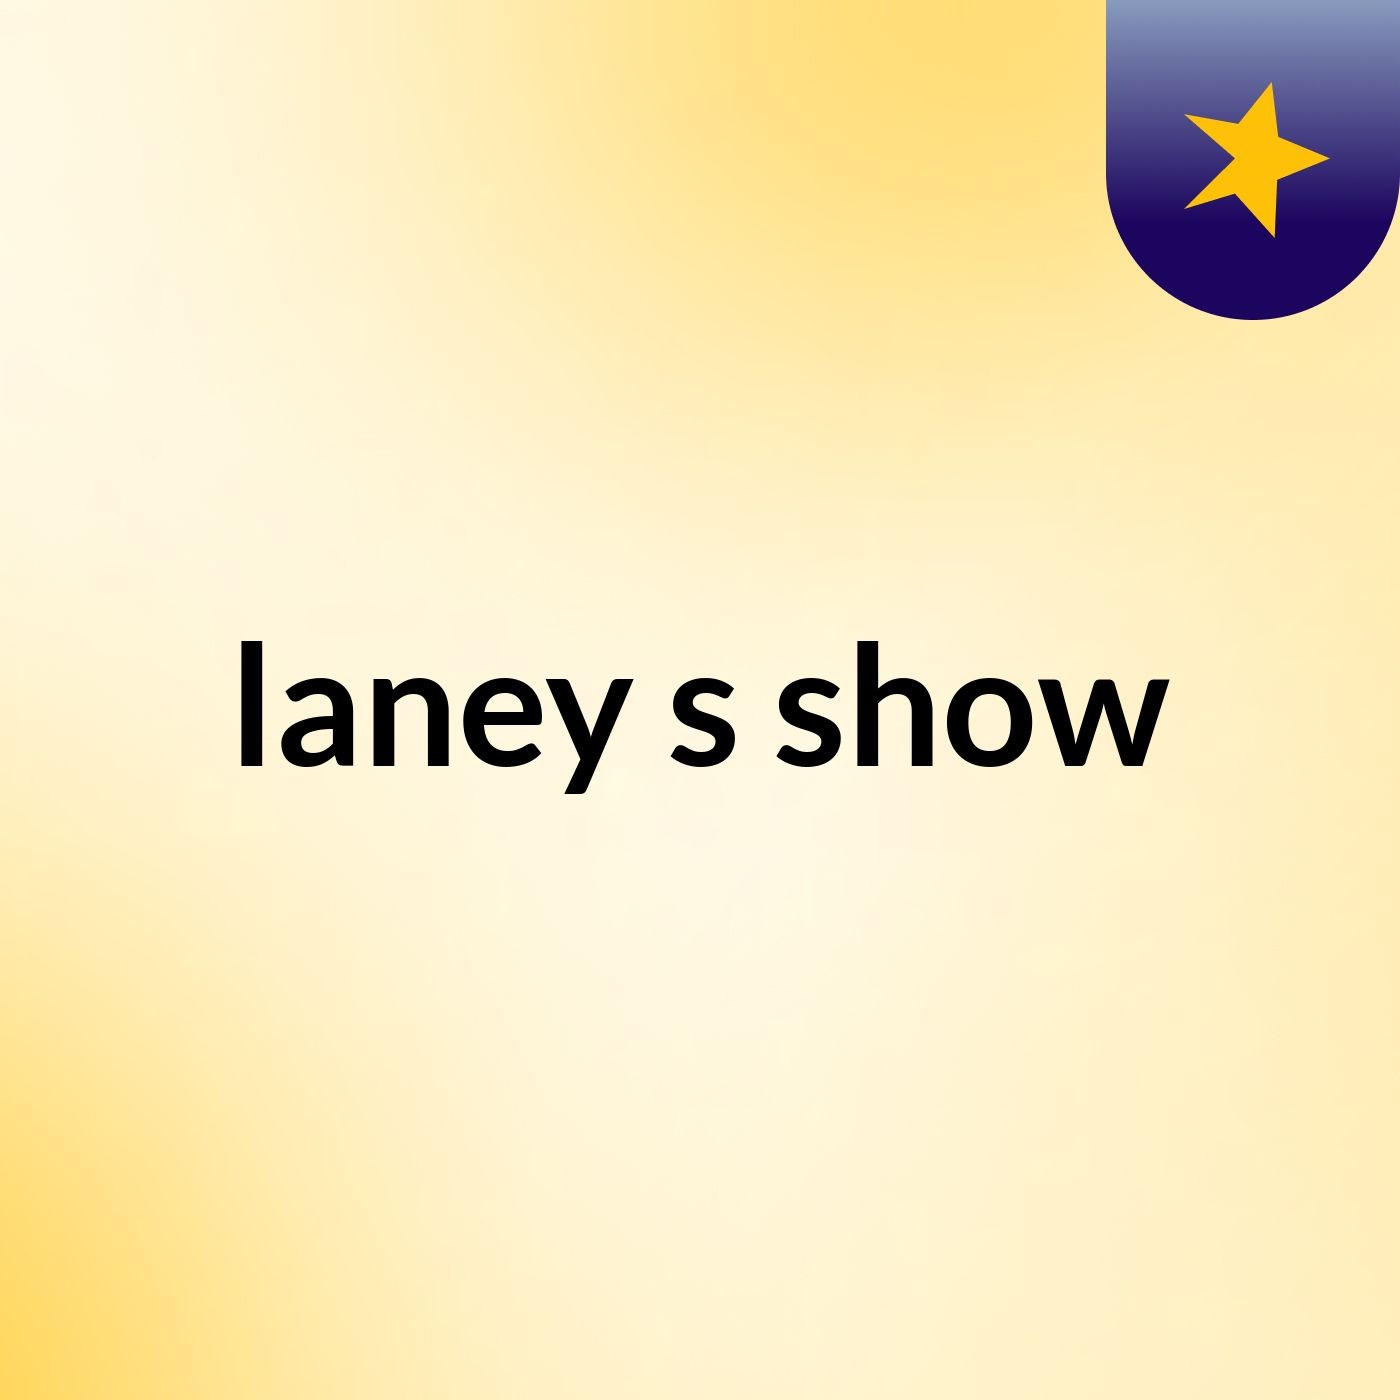 laney's show